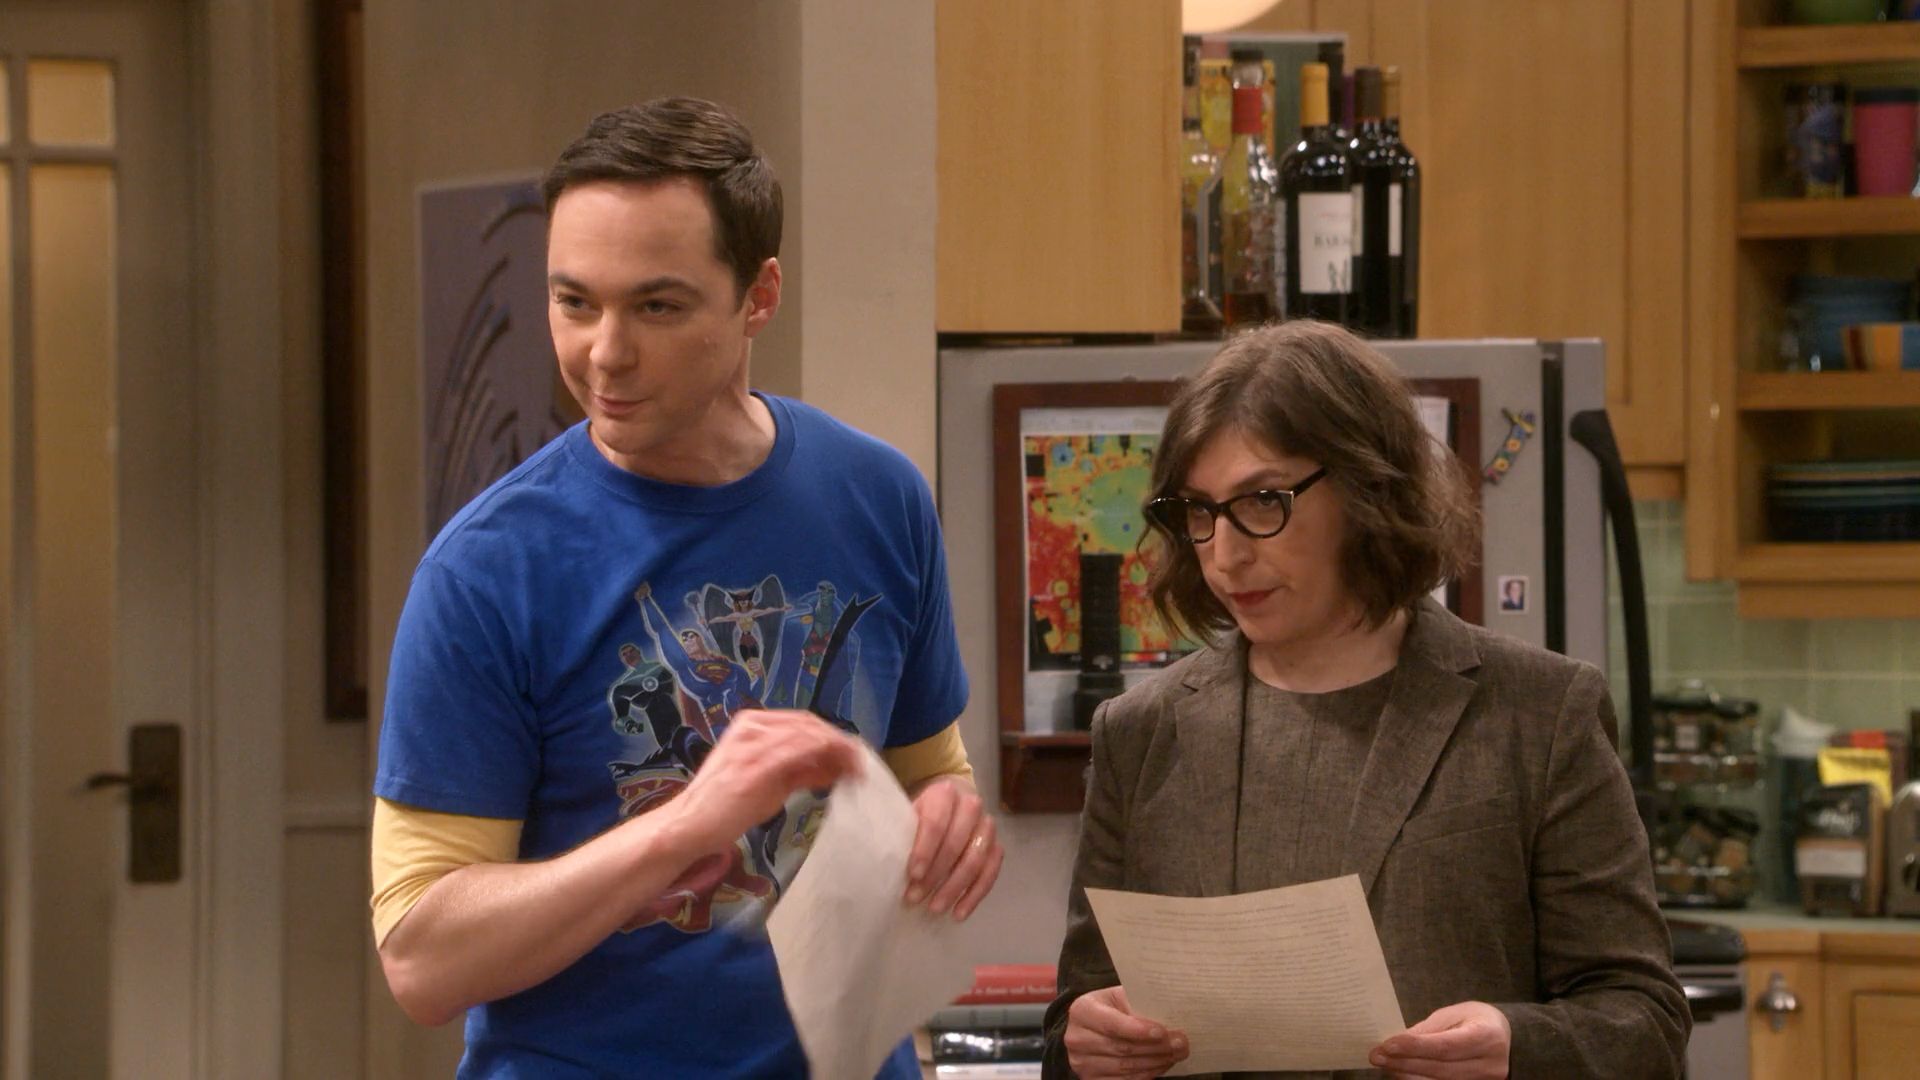 The Big Bang Theory Show Summary Upcoming Episodes And Tv Guide From On My Tv What S On Your Tv We have added screencaps from episode 1.10 the loobenfeld. on my tv